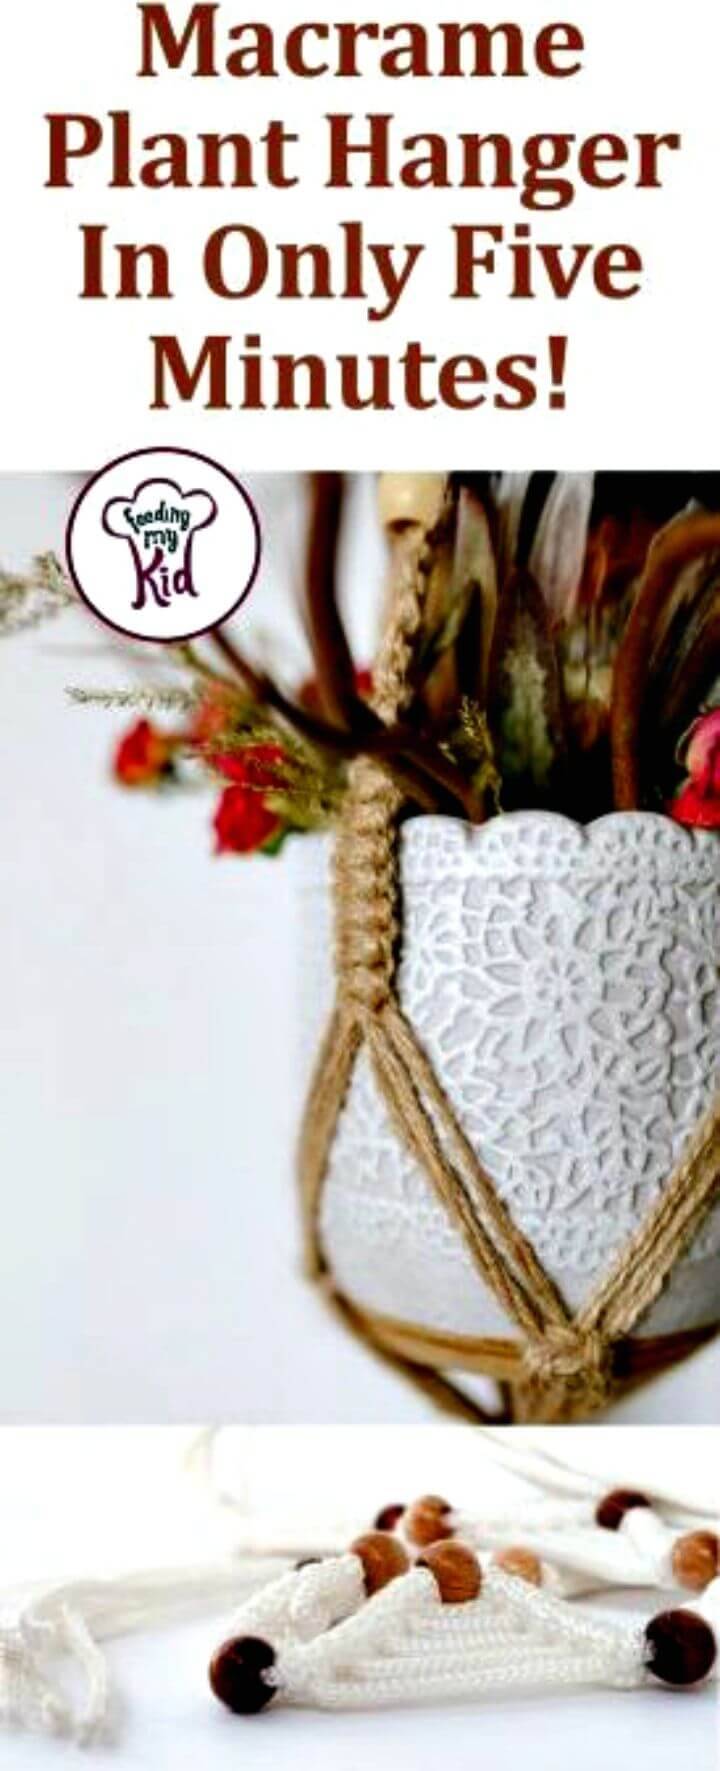 Make Macrame Plant Hanger In Only Five Minutes